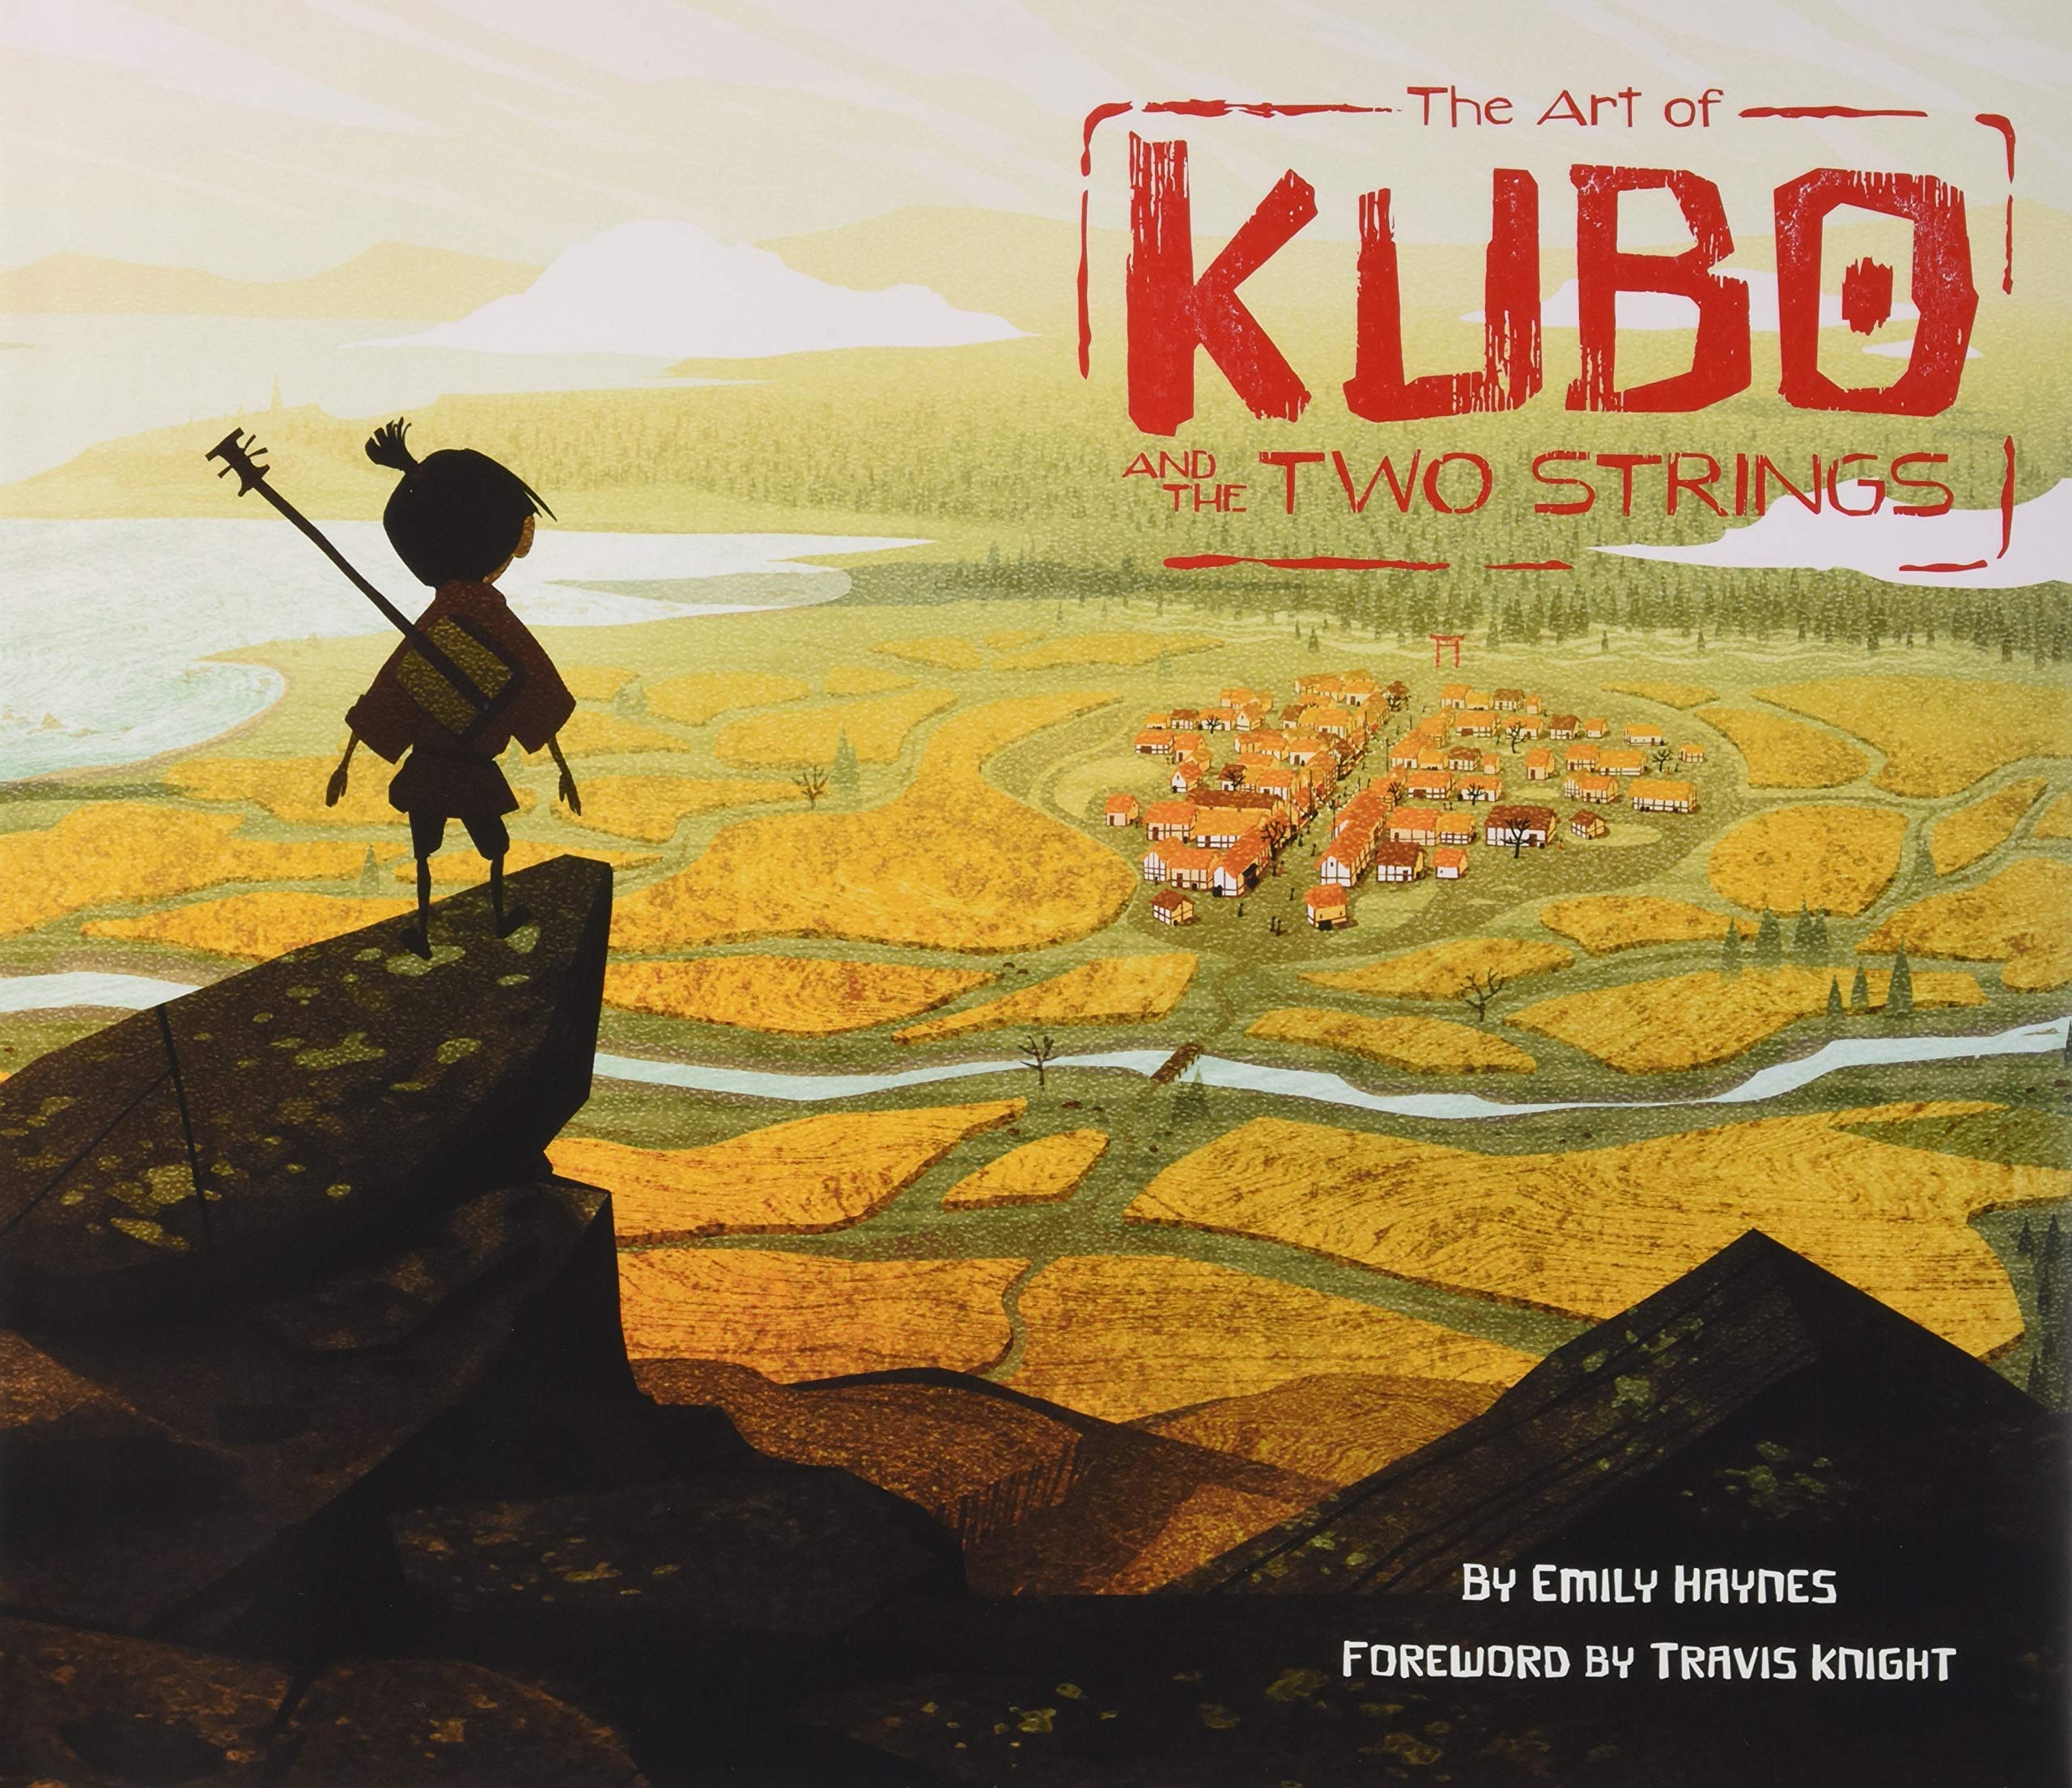 The Art of Kubo and the Two Strings Hardcover Art Book Preview